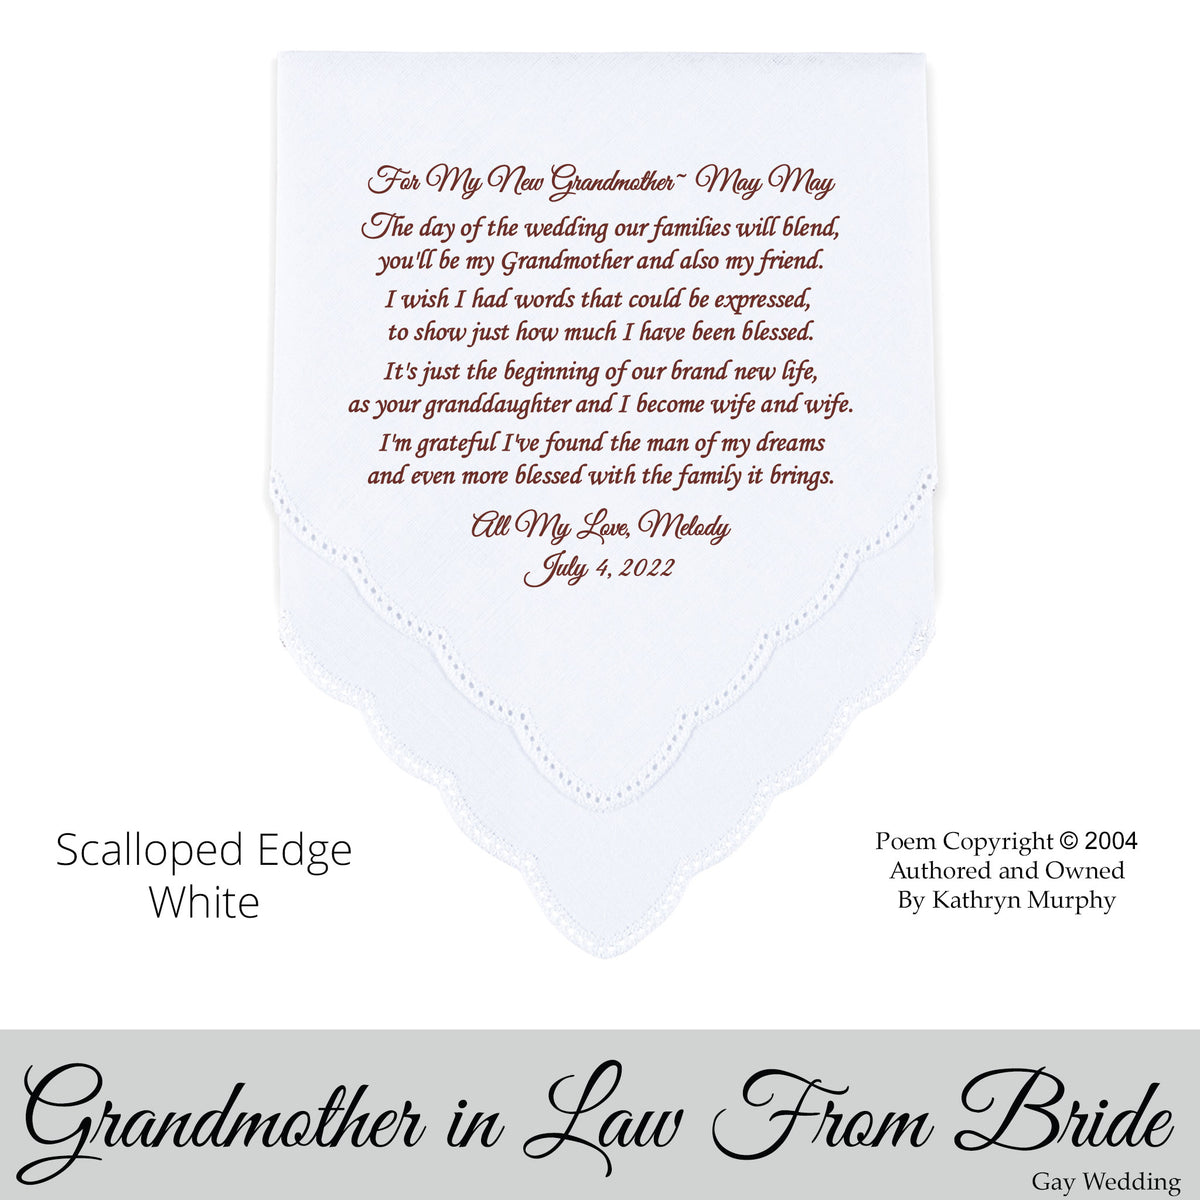 Gay Wedding Gift for the Grandmother of the bride poem printed wedding hankie